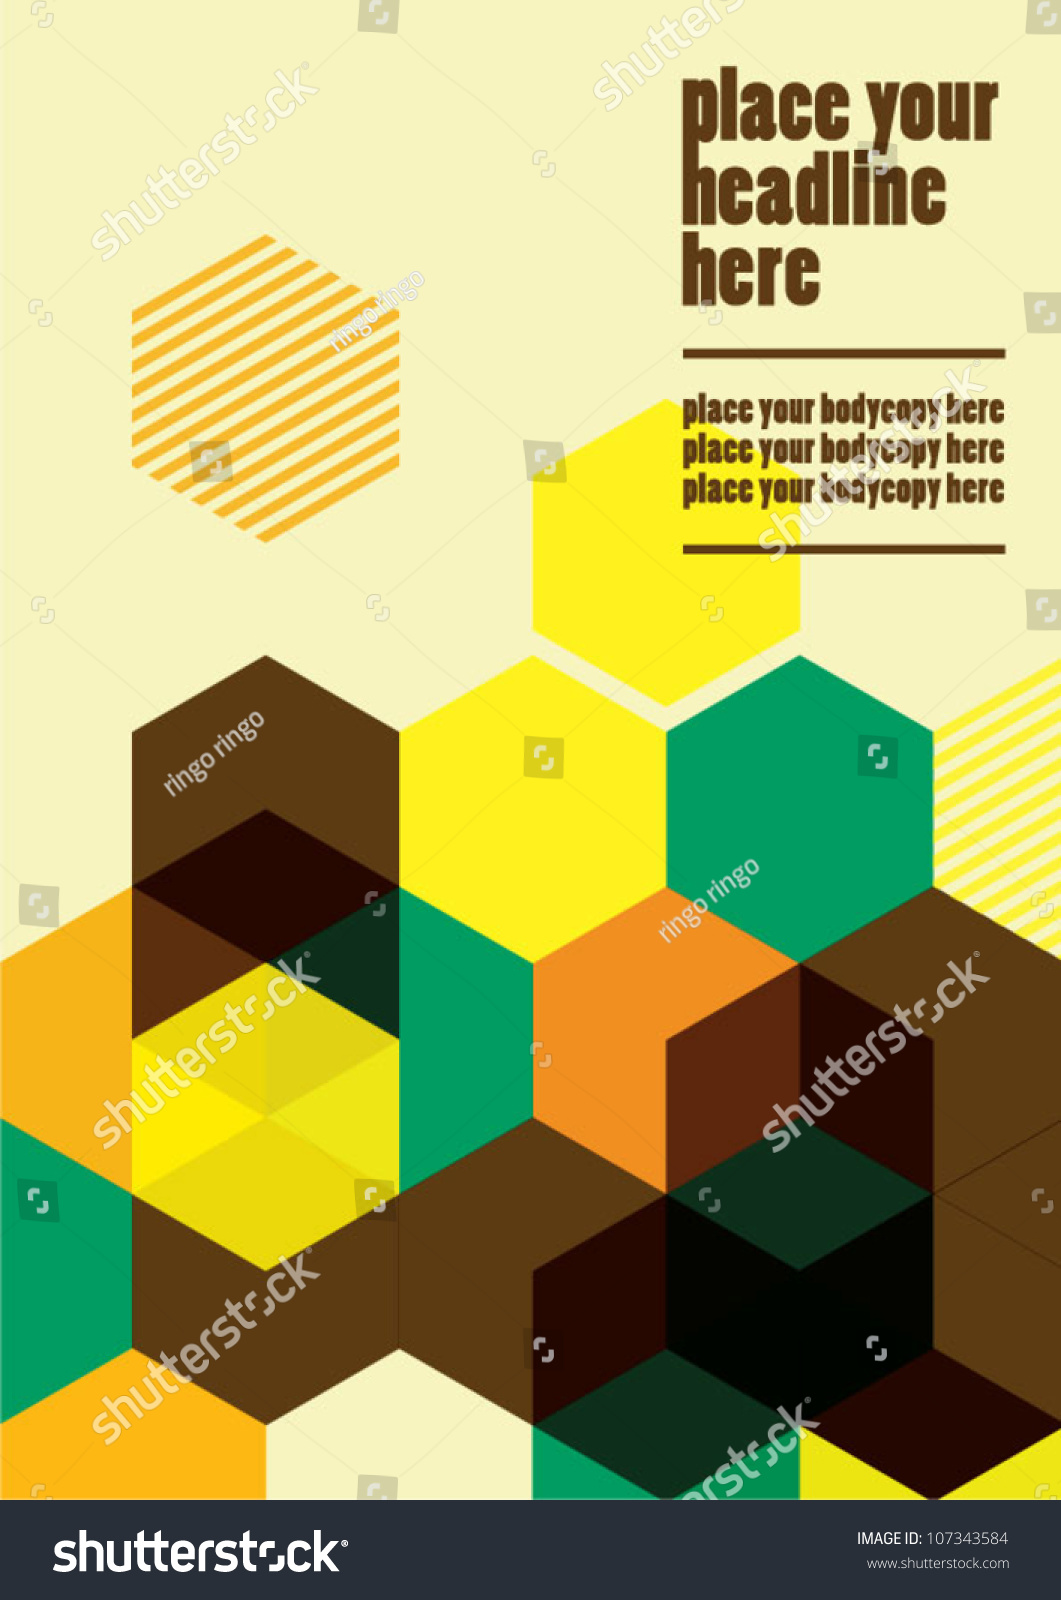 Abstract Web Design/Vector/Wallpaper Background/Book Cover - 107343584